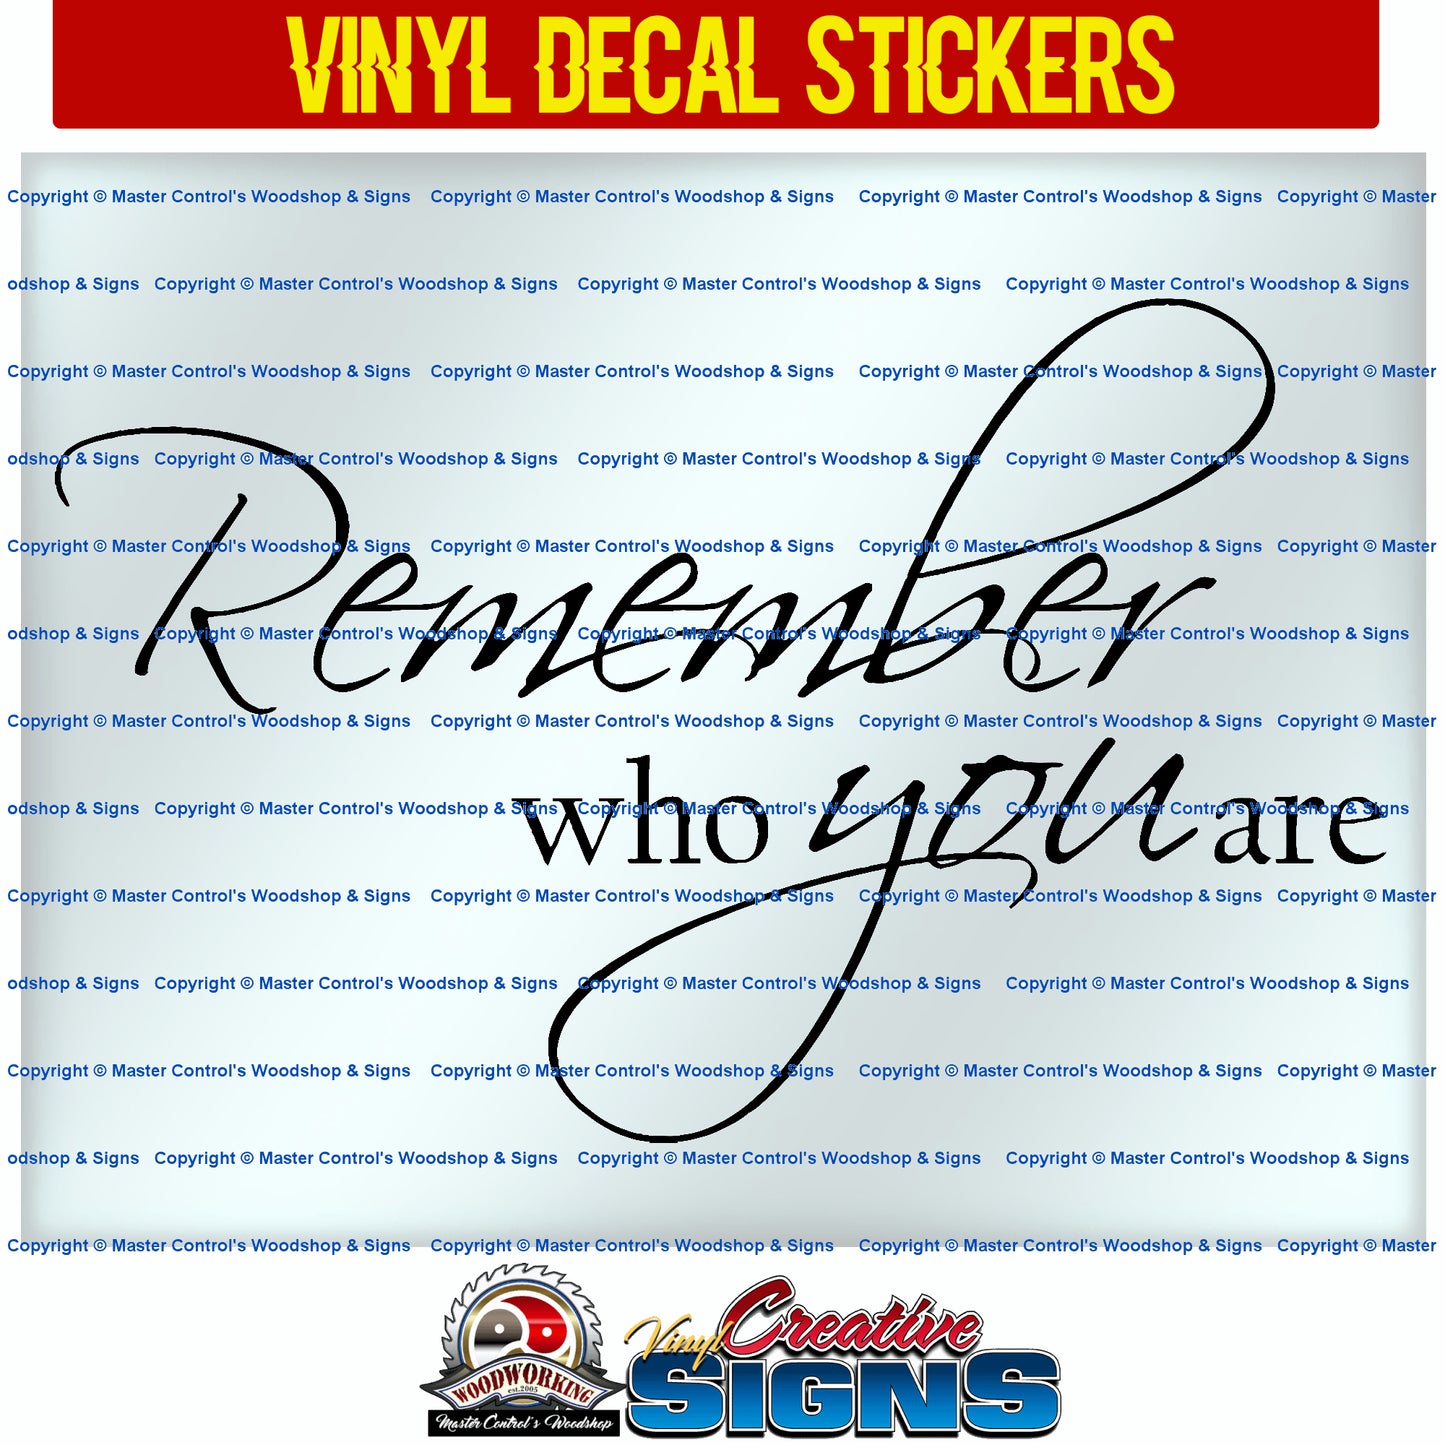 Vinyl Decal Stickers from an Image or Text to be added to your product